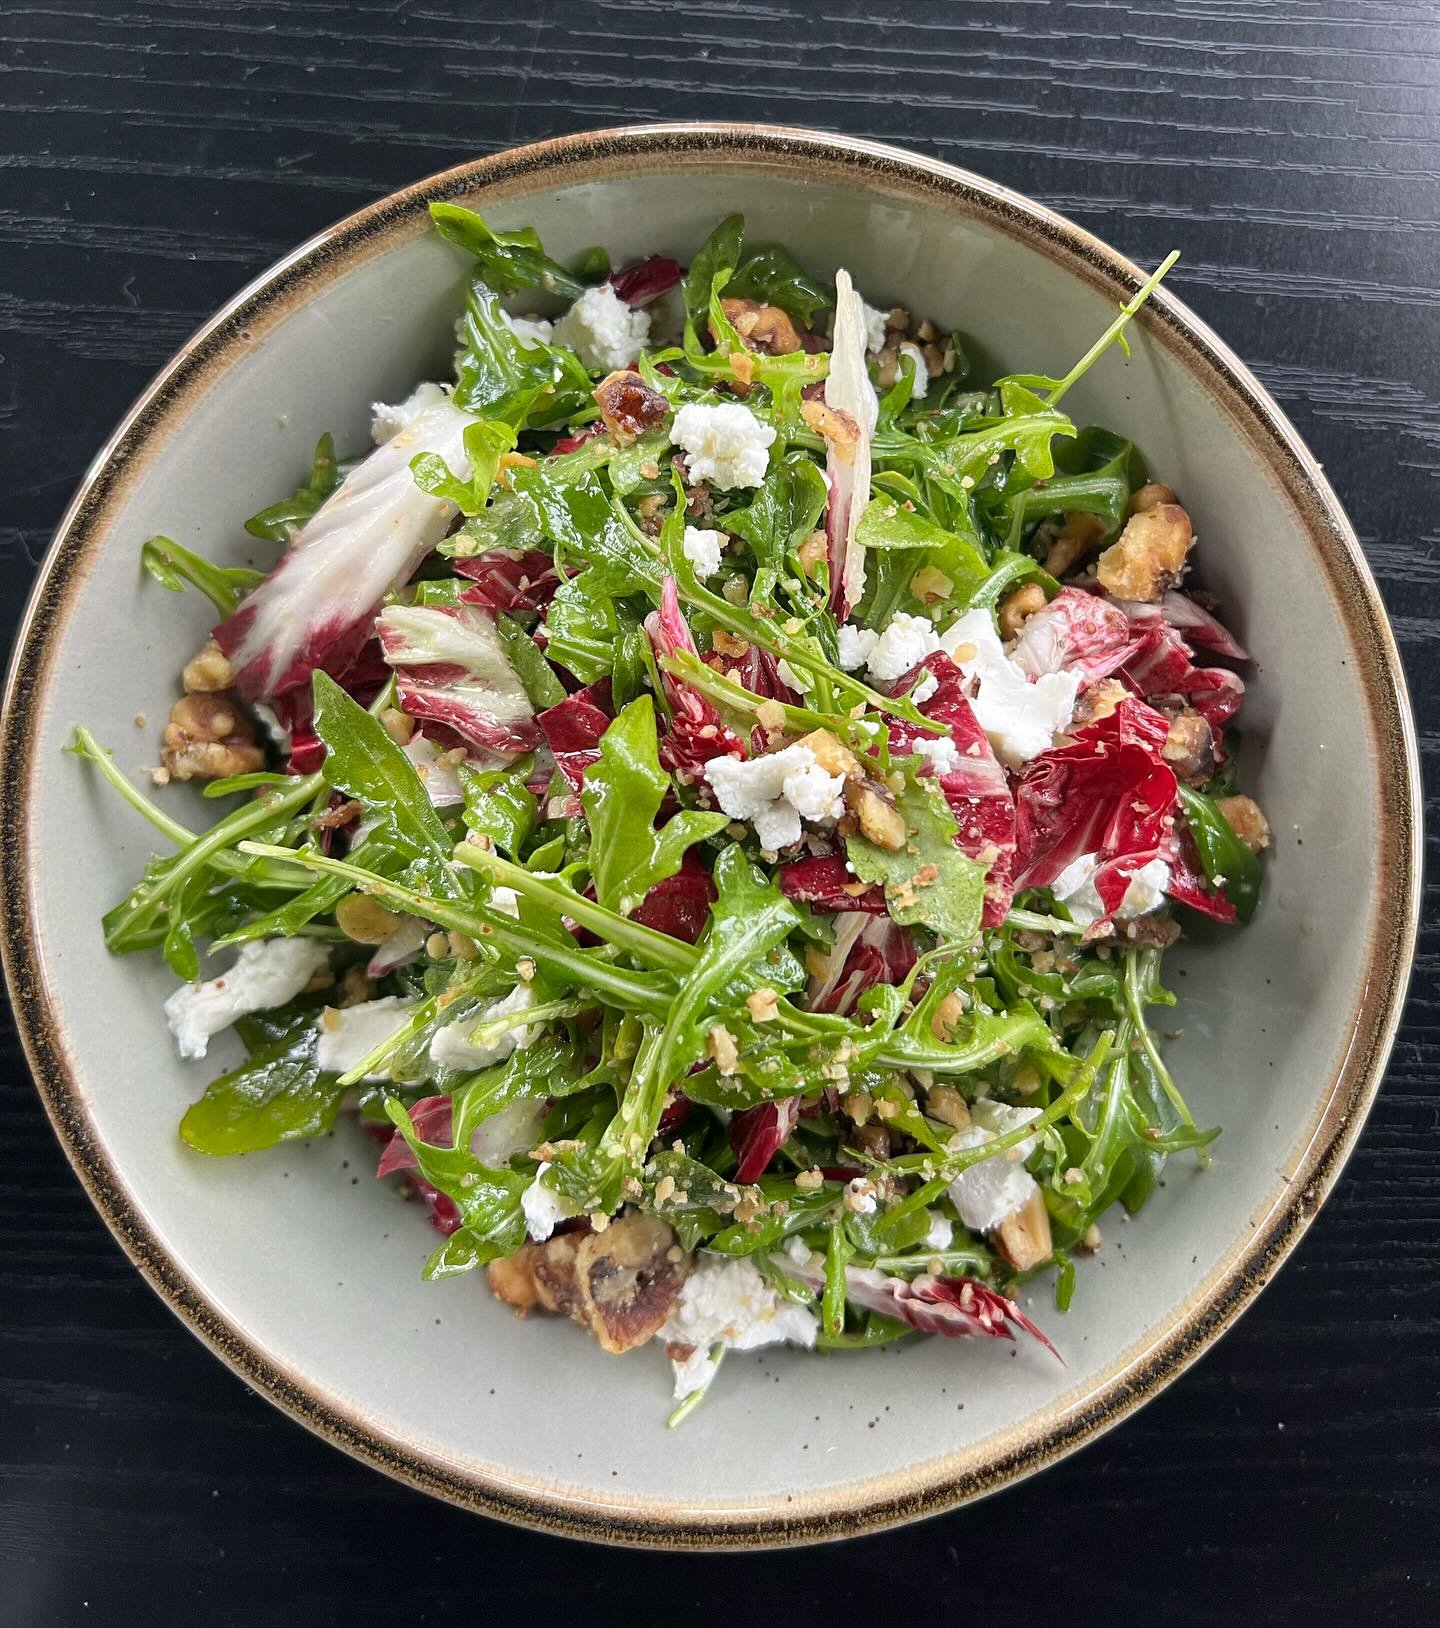 Spring in a bowl, the Arugula Salad, with Goat Cheese, Candied Walnuts, and White Balsamic Vinaigrette.